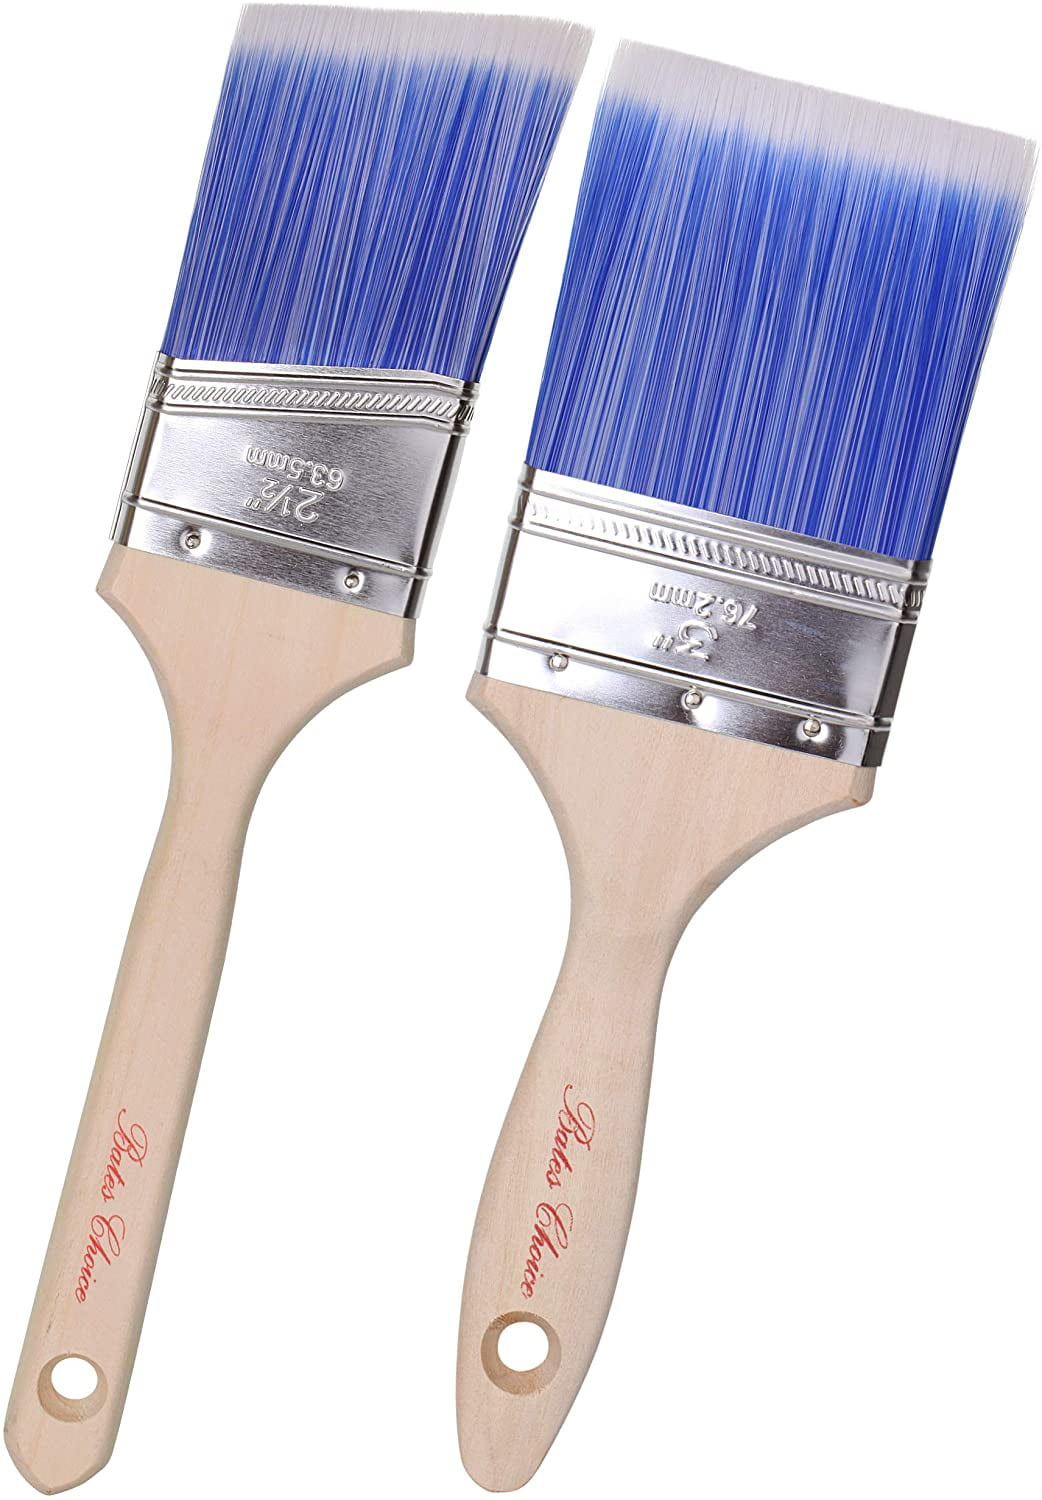 2 Pack House Wall,Trim Paint Brush Set Home Exterior or Interior Brushes 